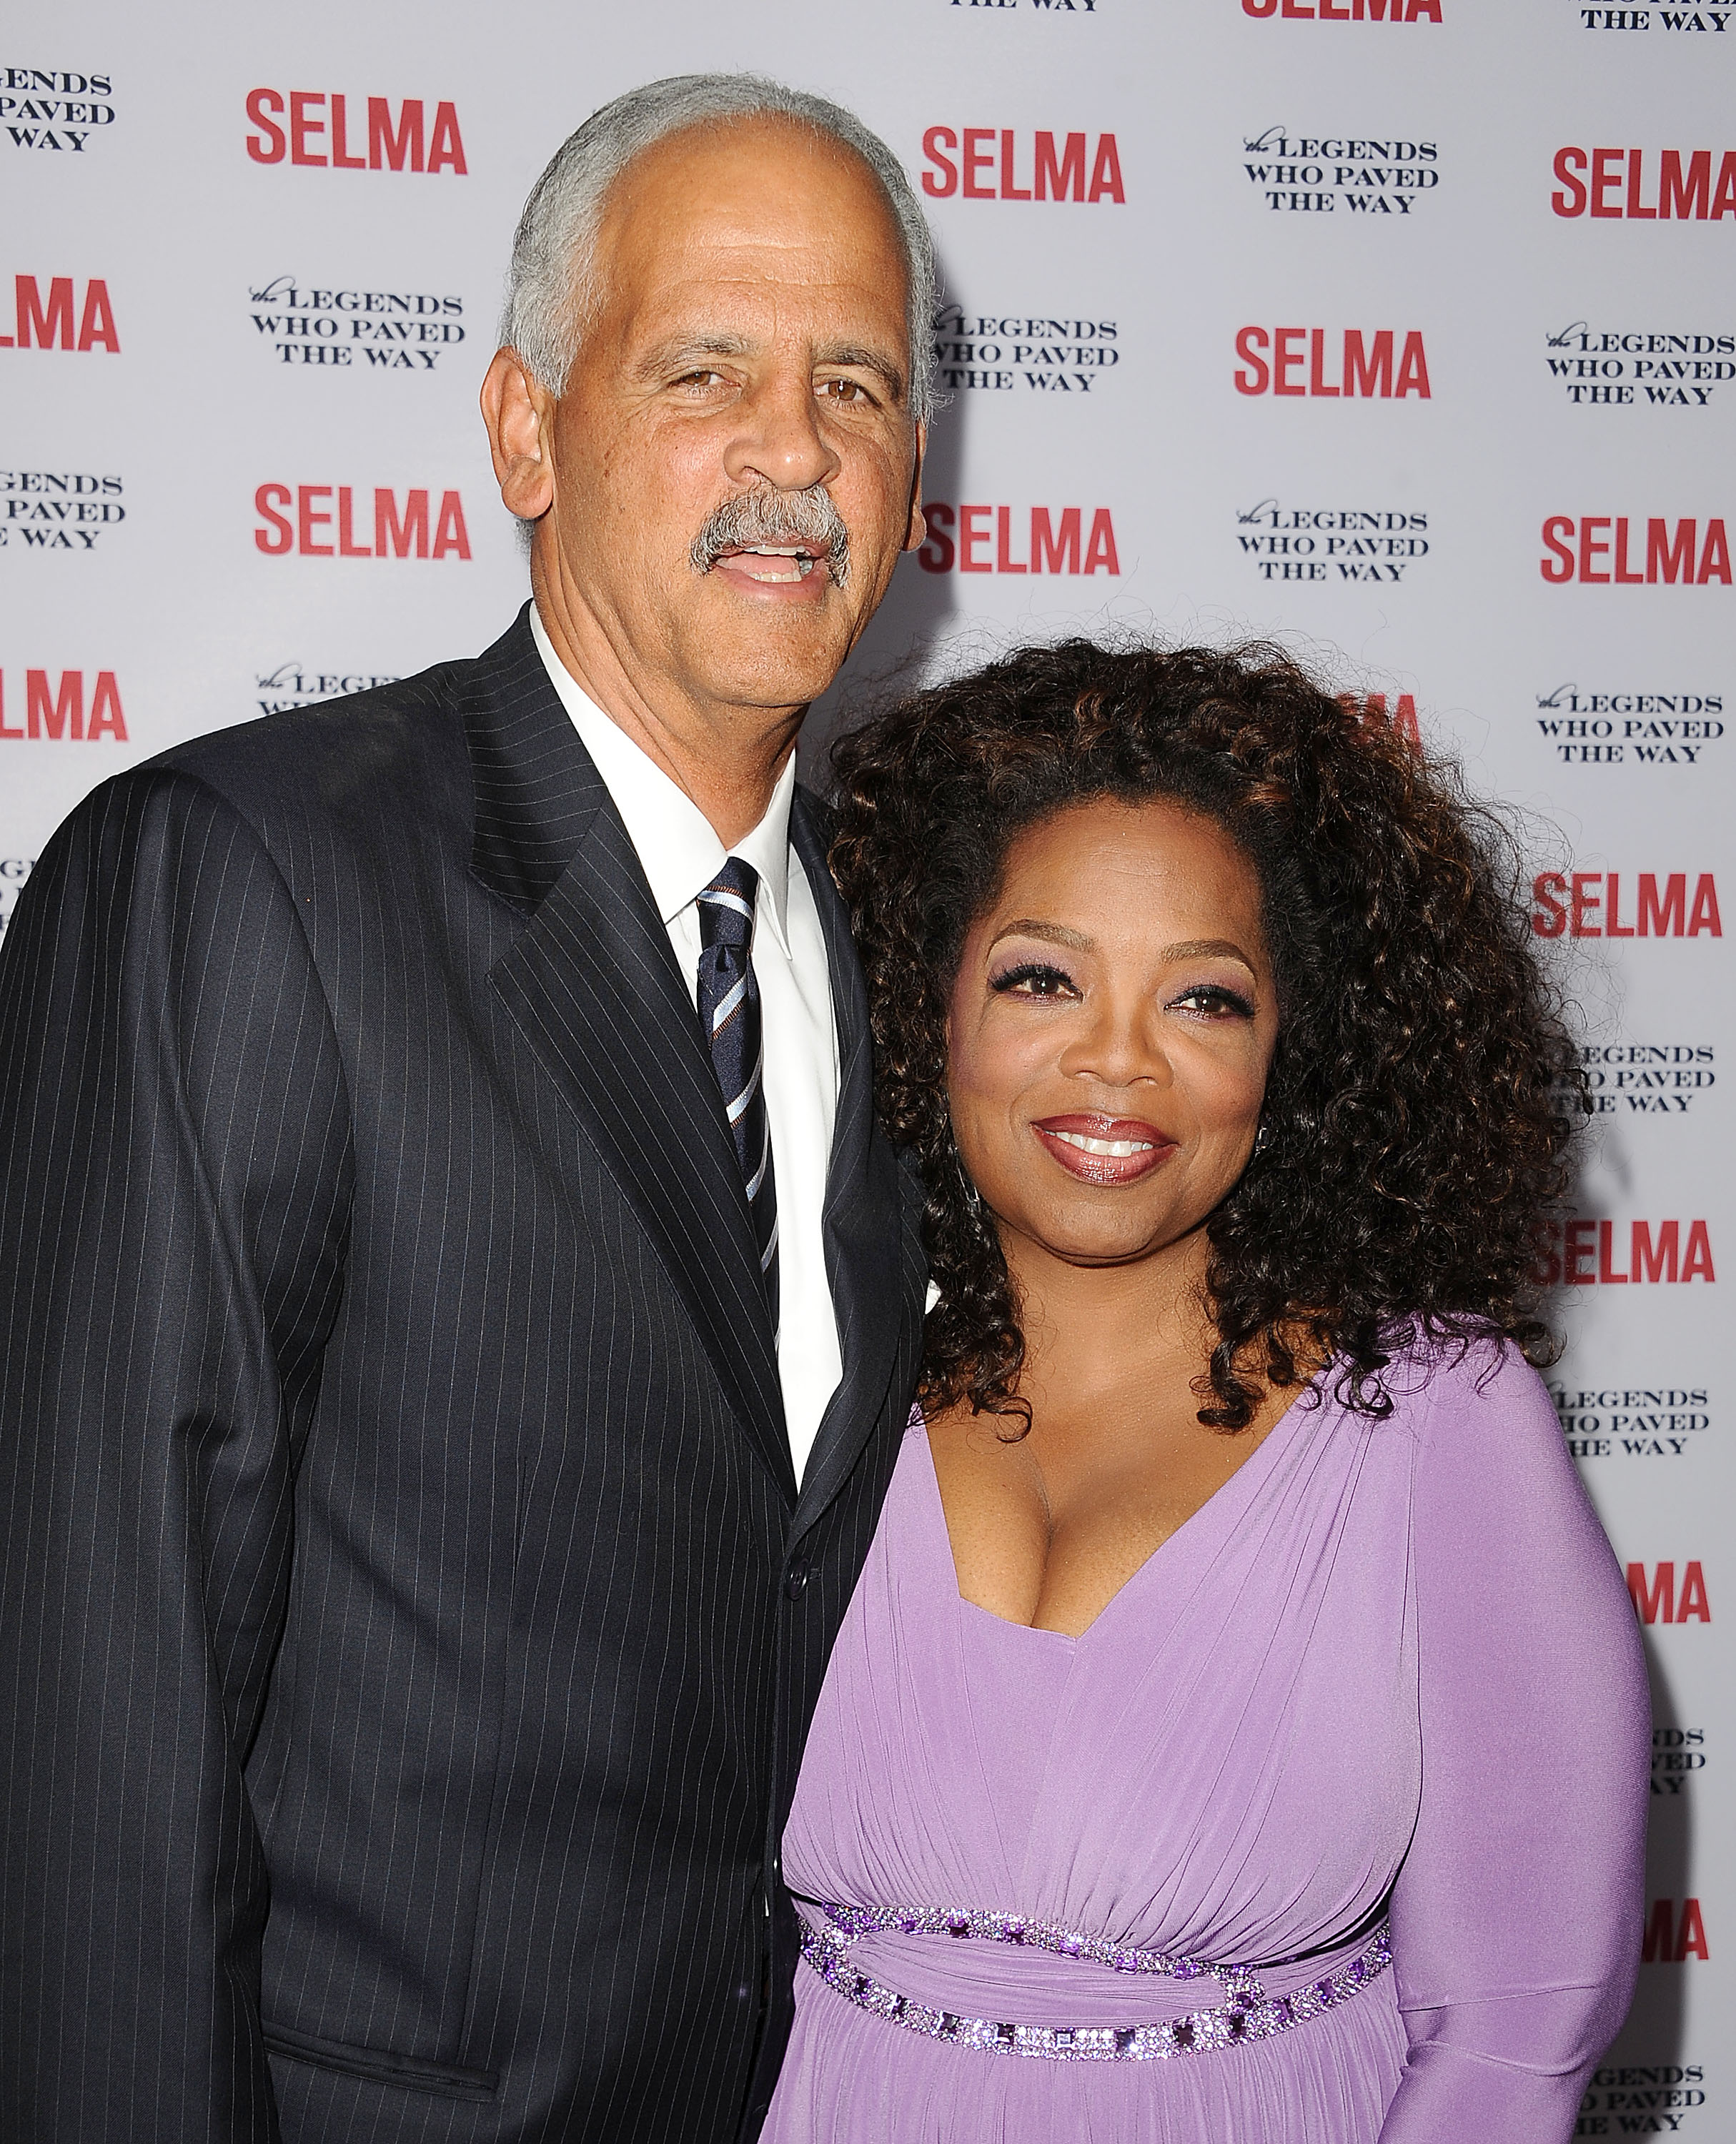 Stedman Graham and Oprah Winfrey attend a gala at Bacara Resort in Goleta, California on December 6, 2014. | Source: Getty Images